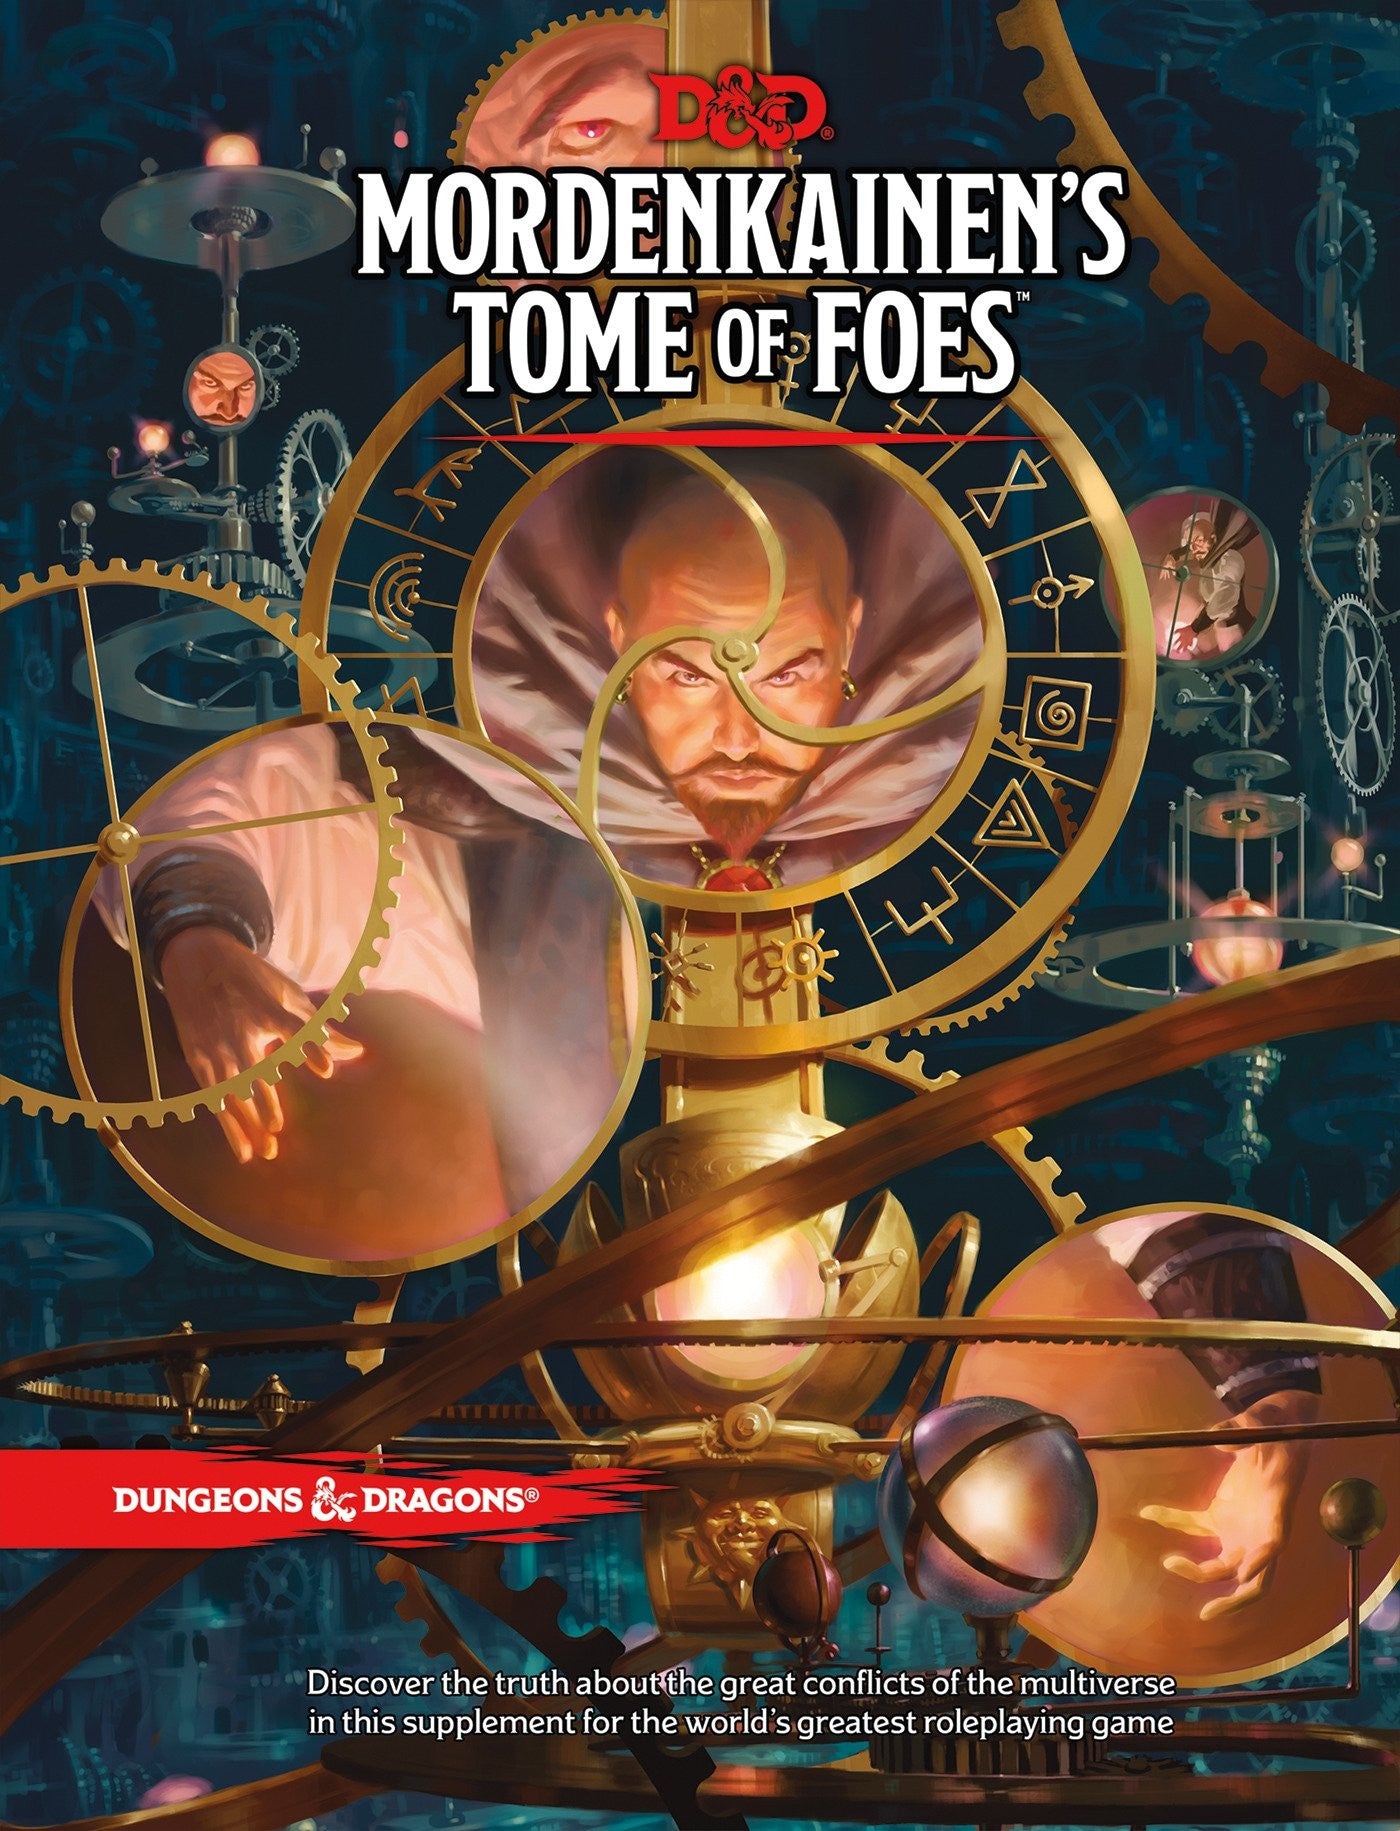 D&D Dungeons & Dragons Mordenkainens Tome of Foes Hardcover